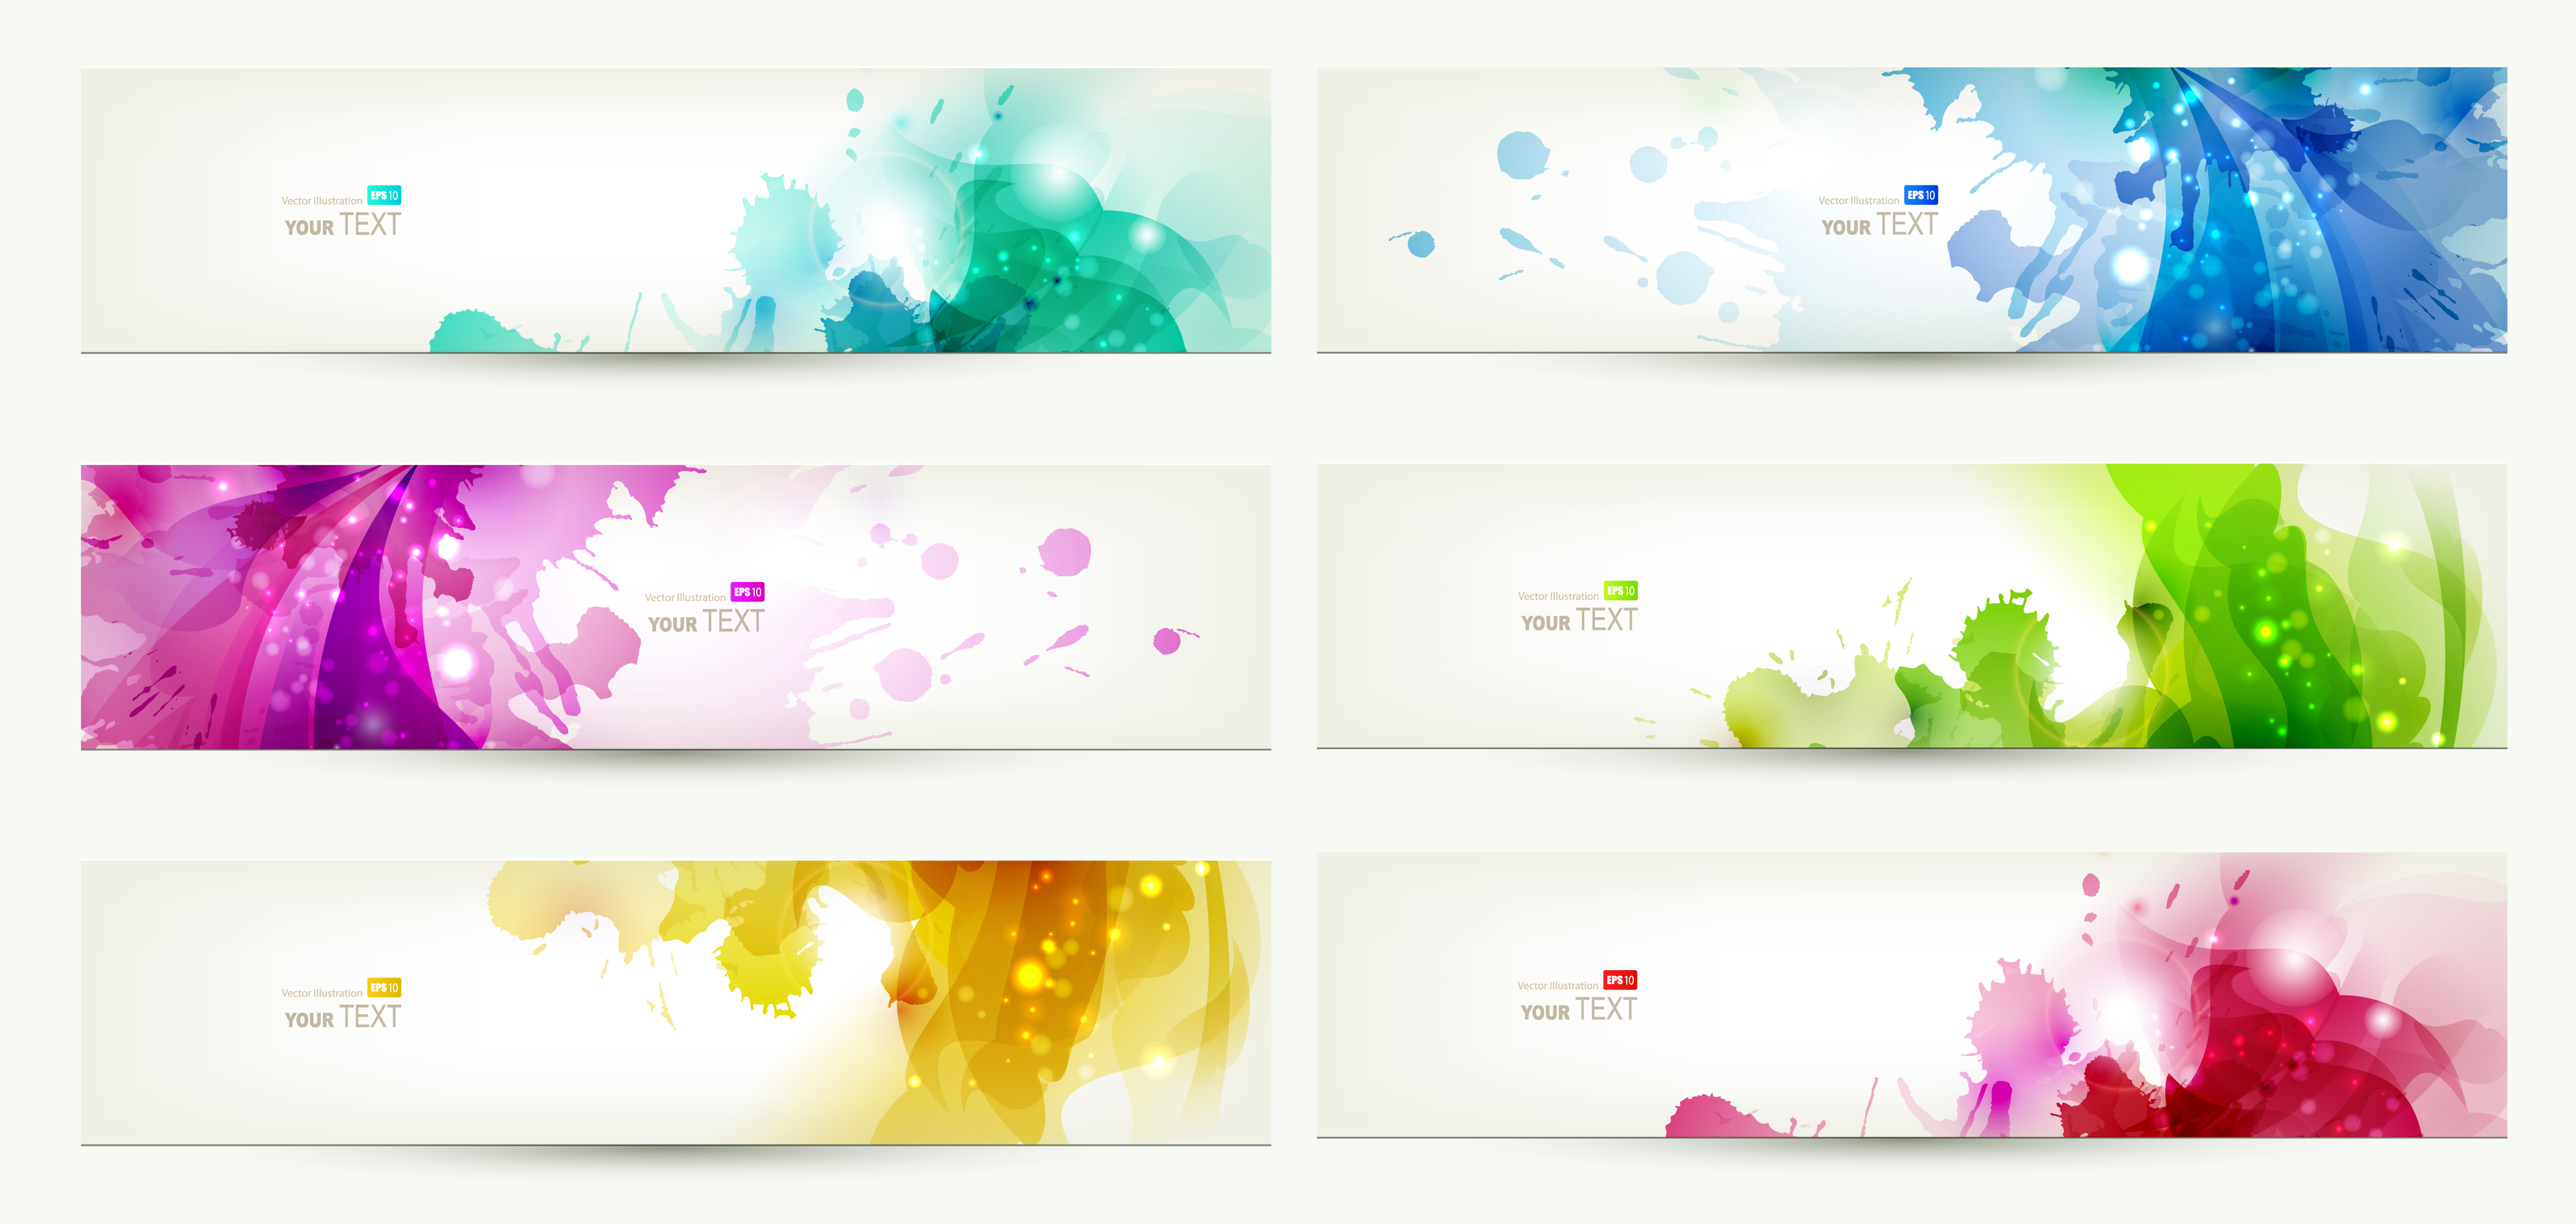 Free Vector Banner Templates